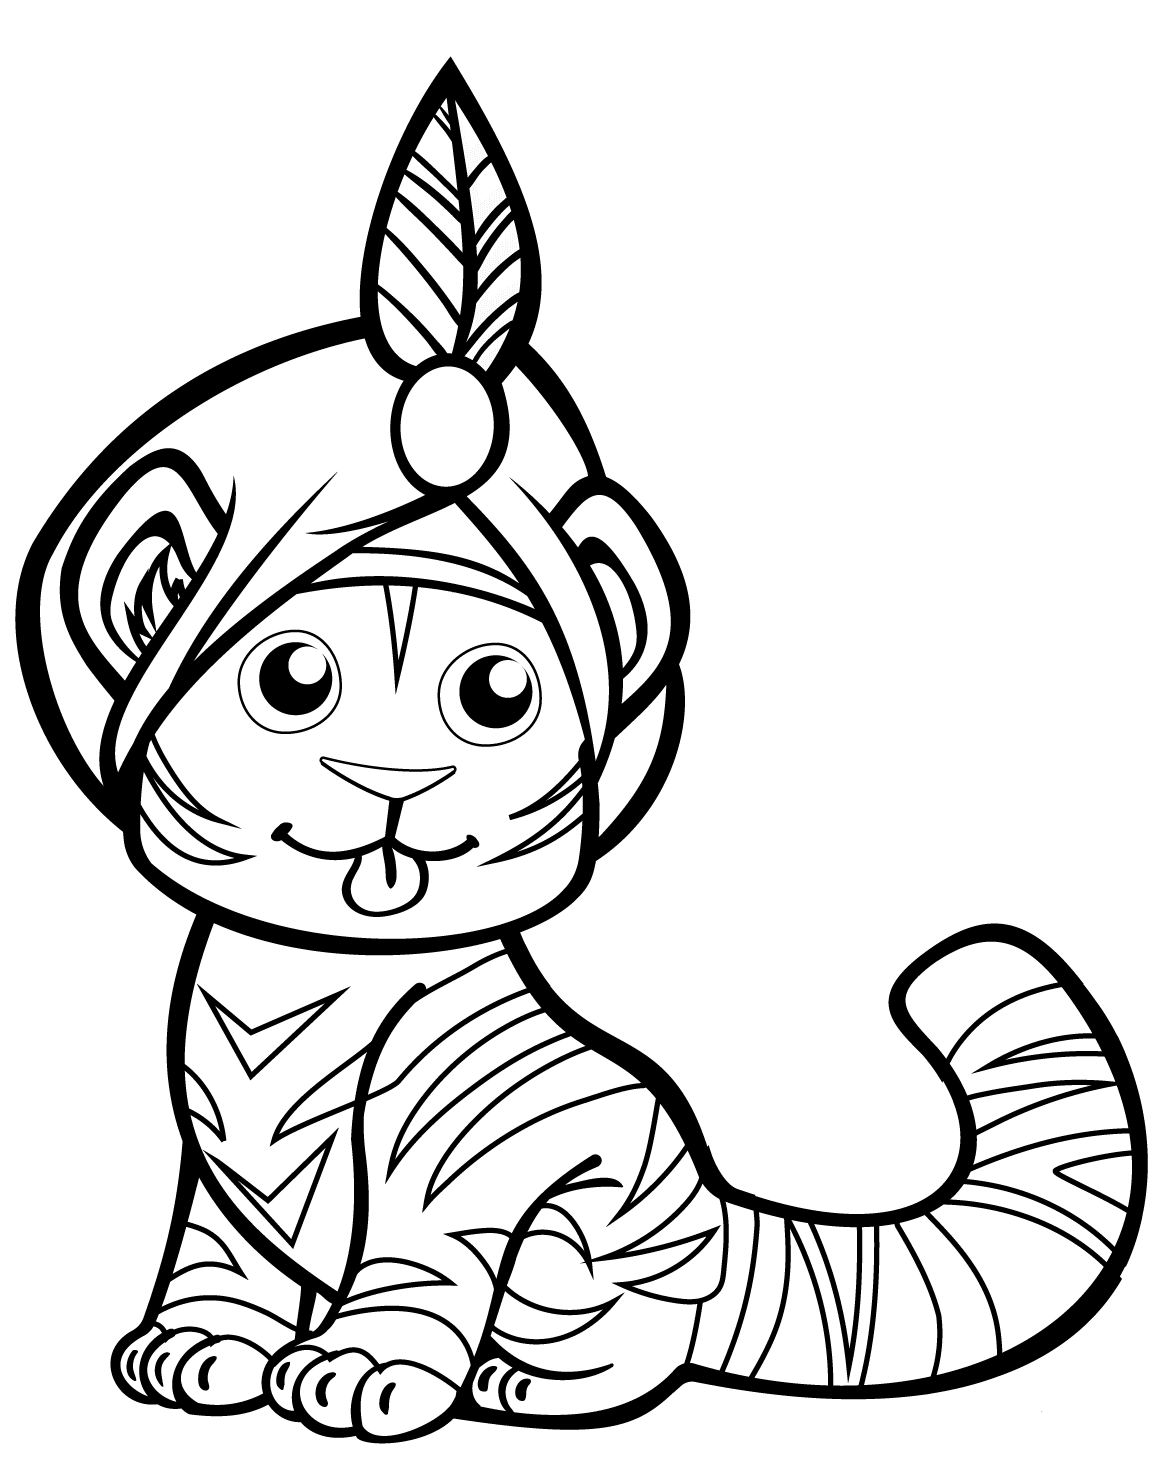 Tiger In Turban coloring page